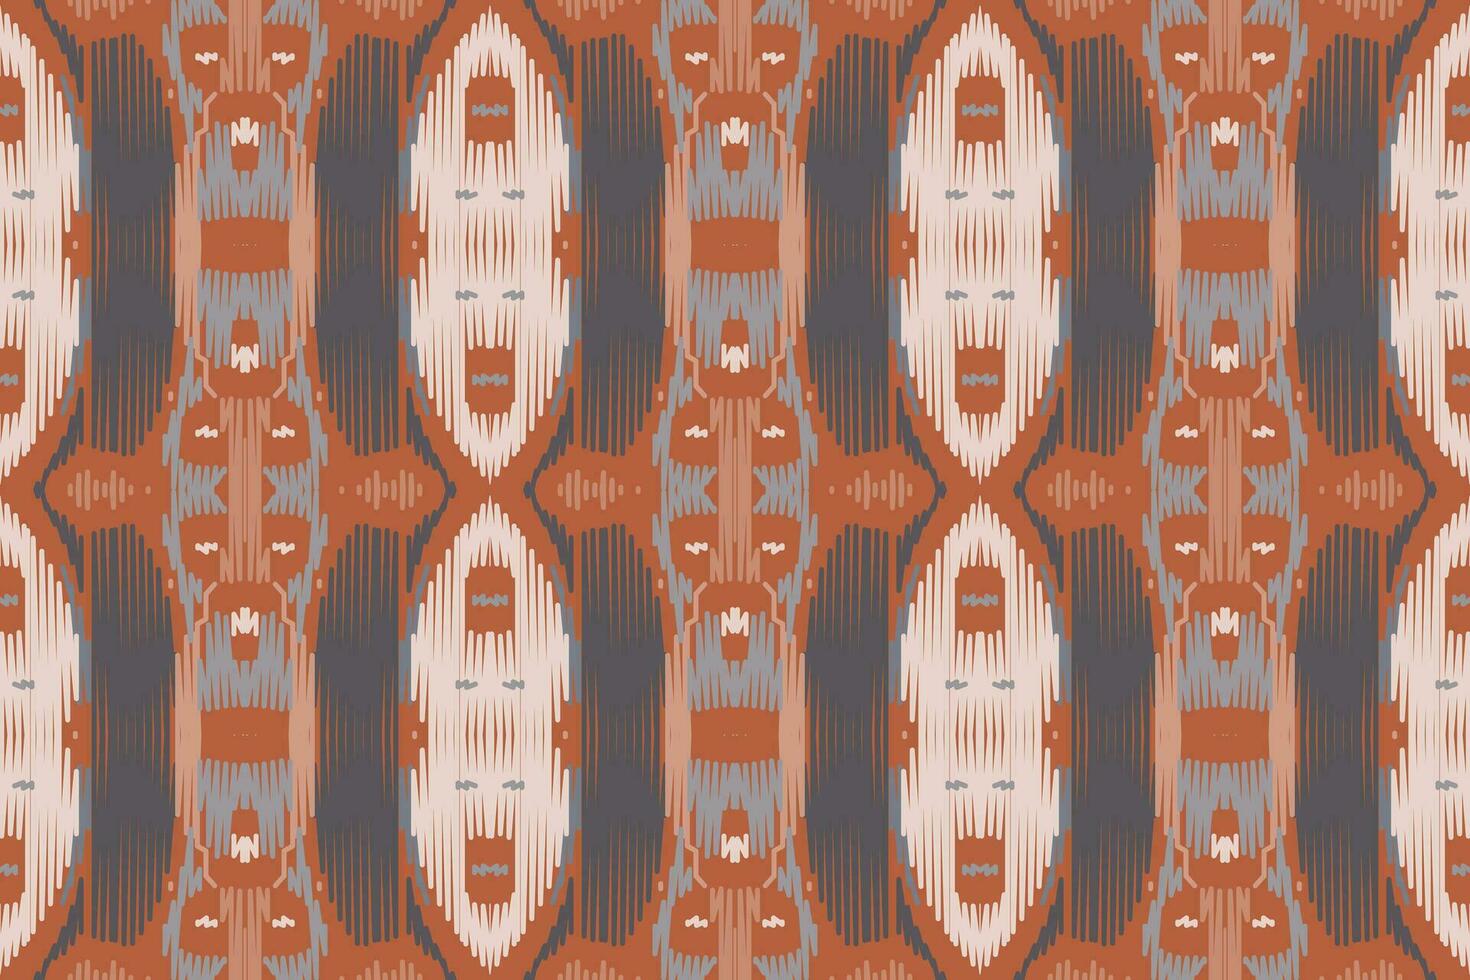 Ikat Seamless Pattern Embroidery Background. Ikat Pattern Geometric Ethnic Oriental Pattern Traditional. Ikat Aztec Style Abstract Design for Print Texture,fabric,saree,sari,carpet. vector